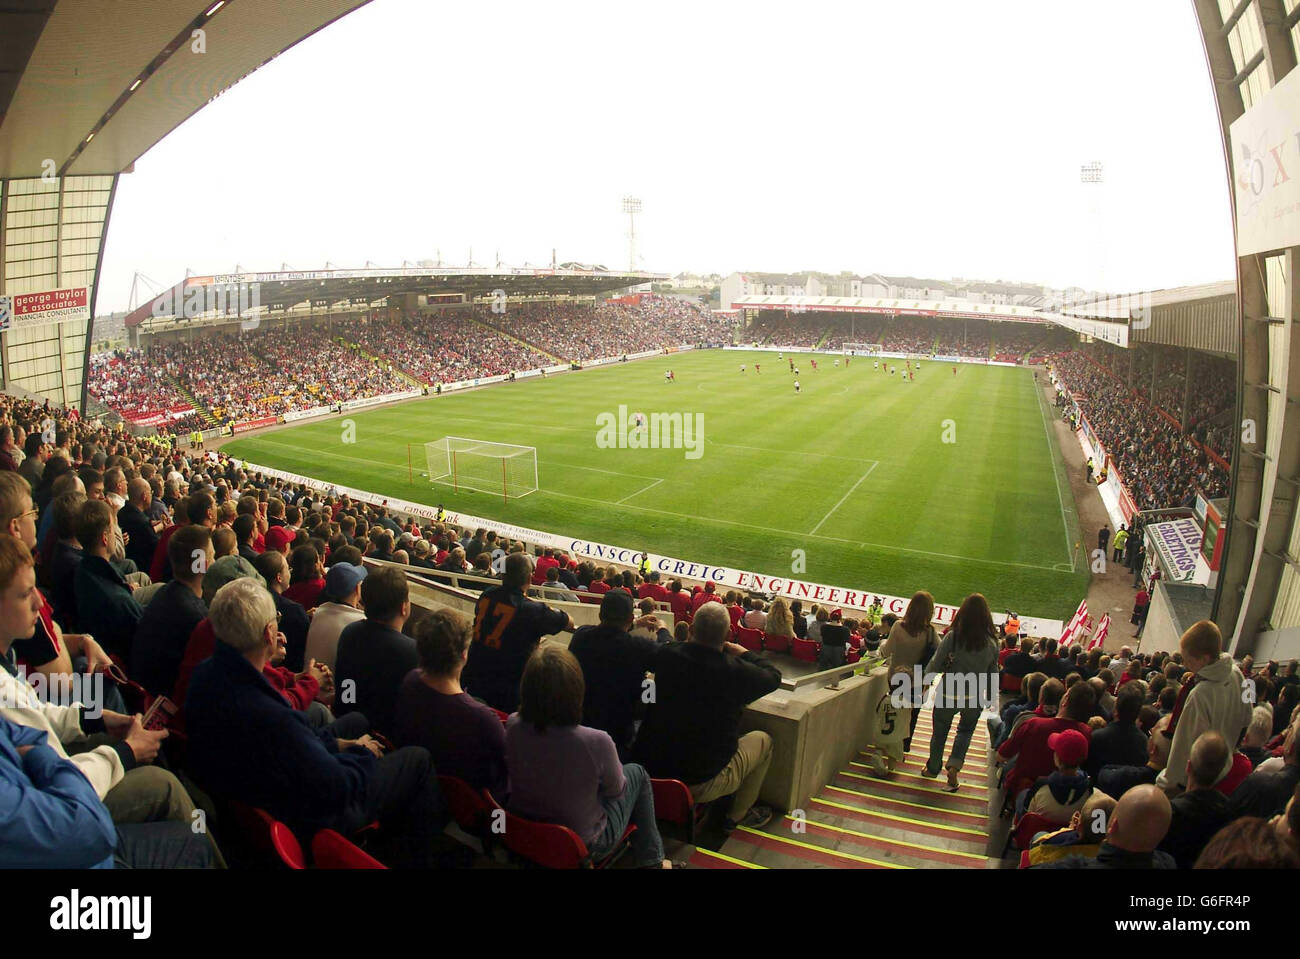 The Pittodrie Stadium in Aberdeen, Tuesday August 5, 2003. where Liverpool are playing Aberdeen in a preseason friendly. Stock Photo